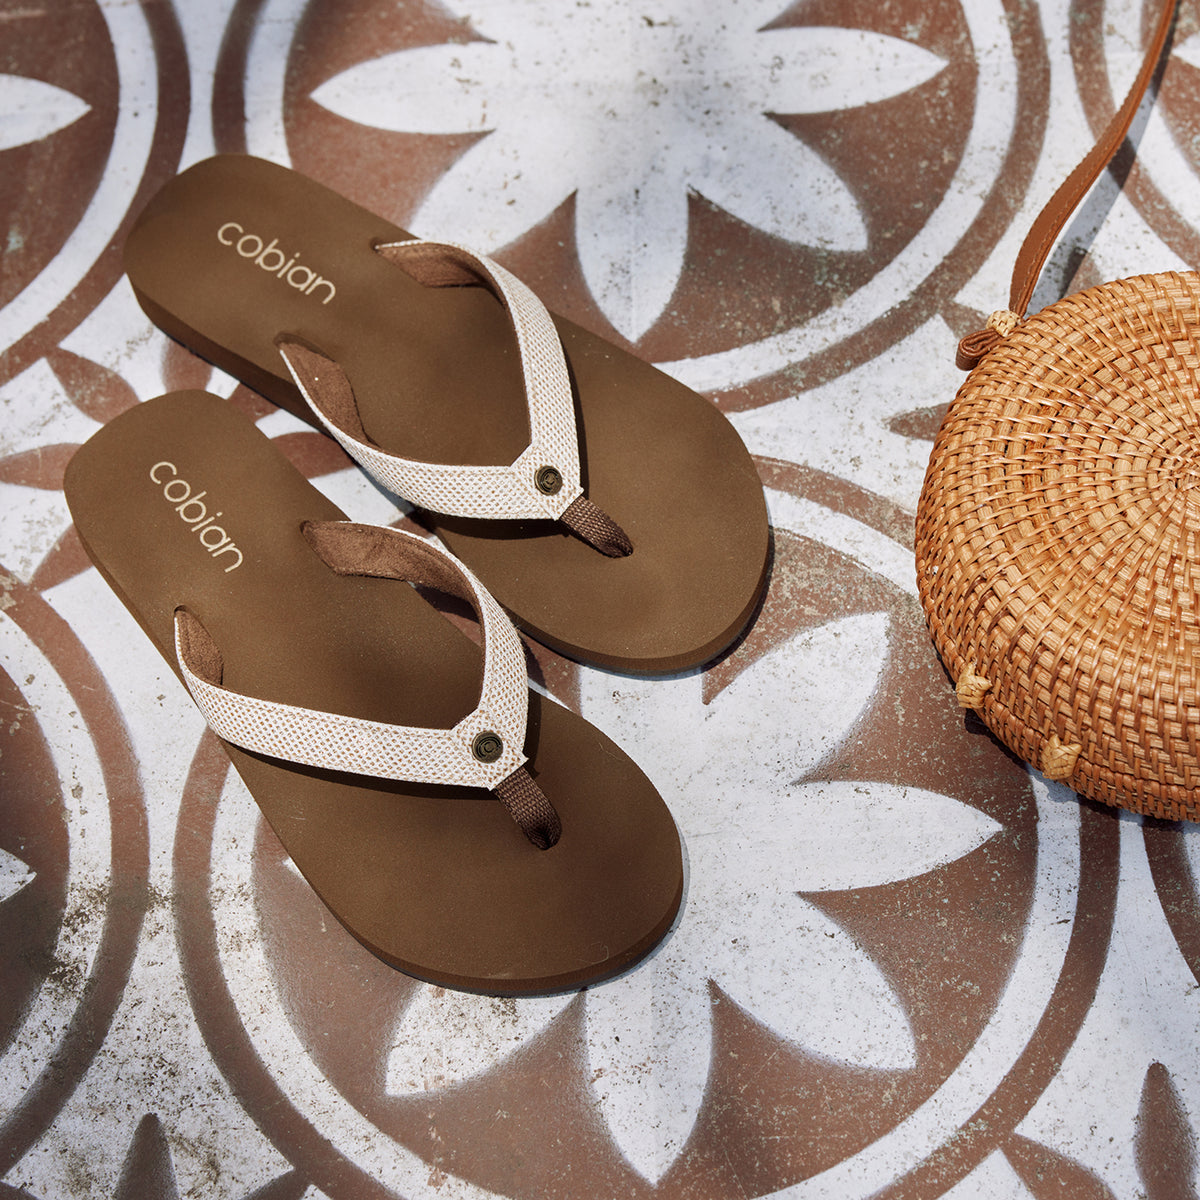 Fiesta Skinny Bounce Tan on flower patterned floor next to a woven bag #color_tan